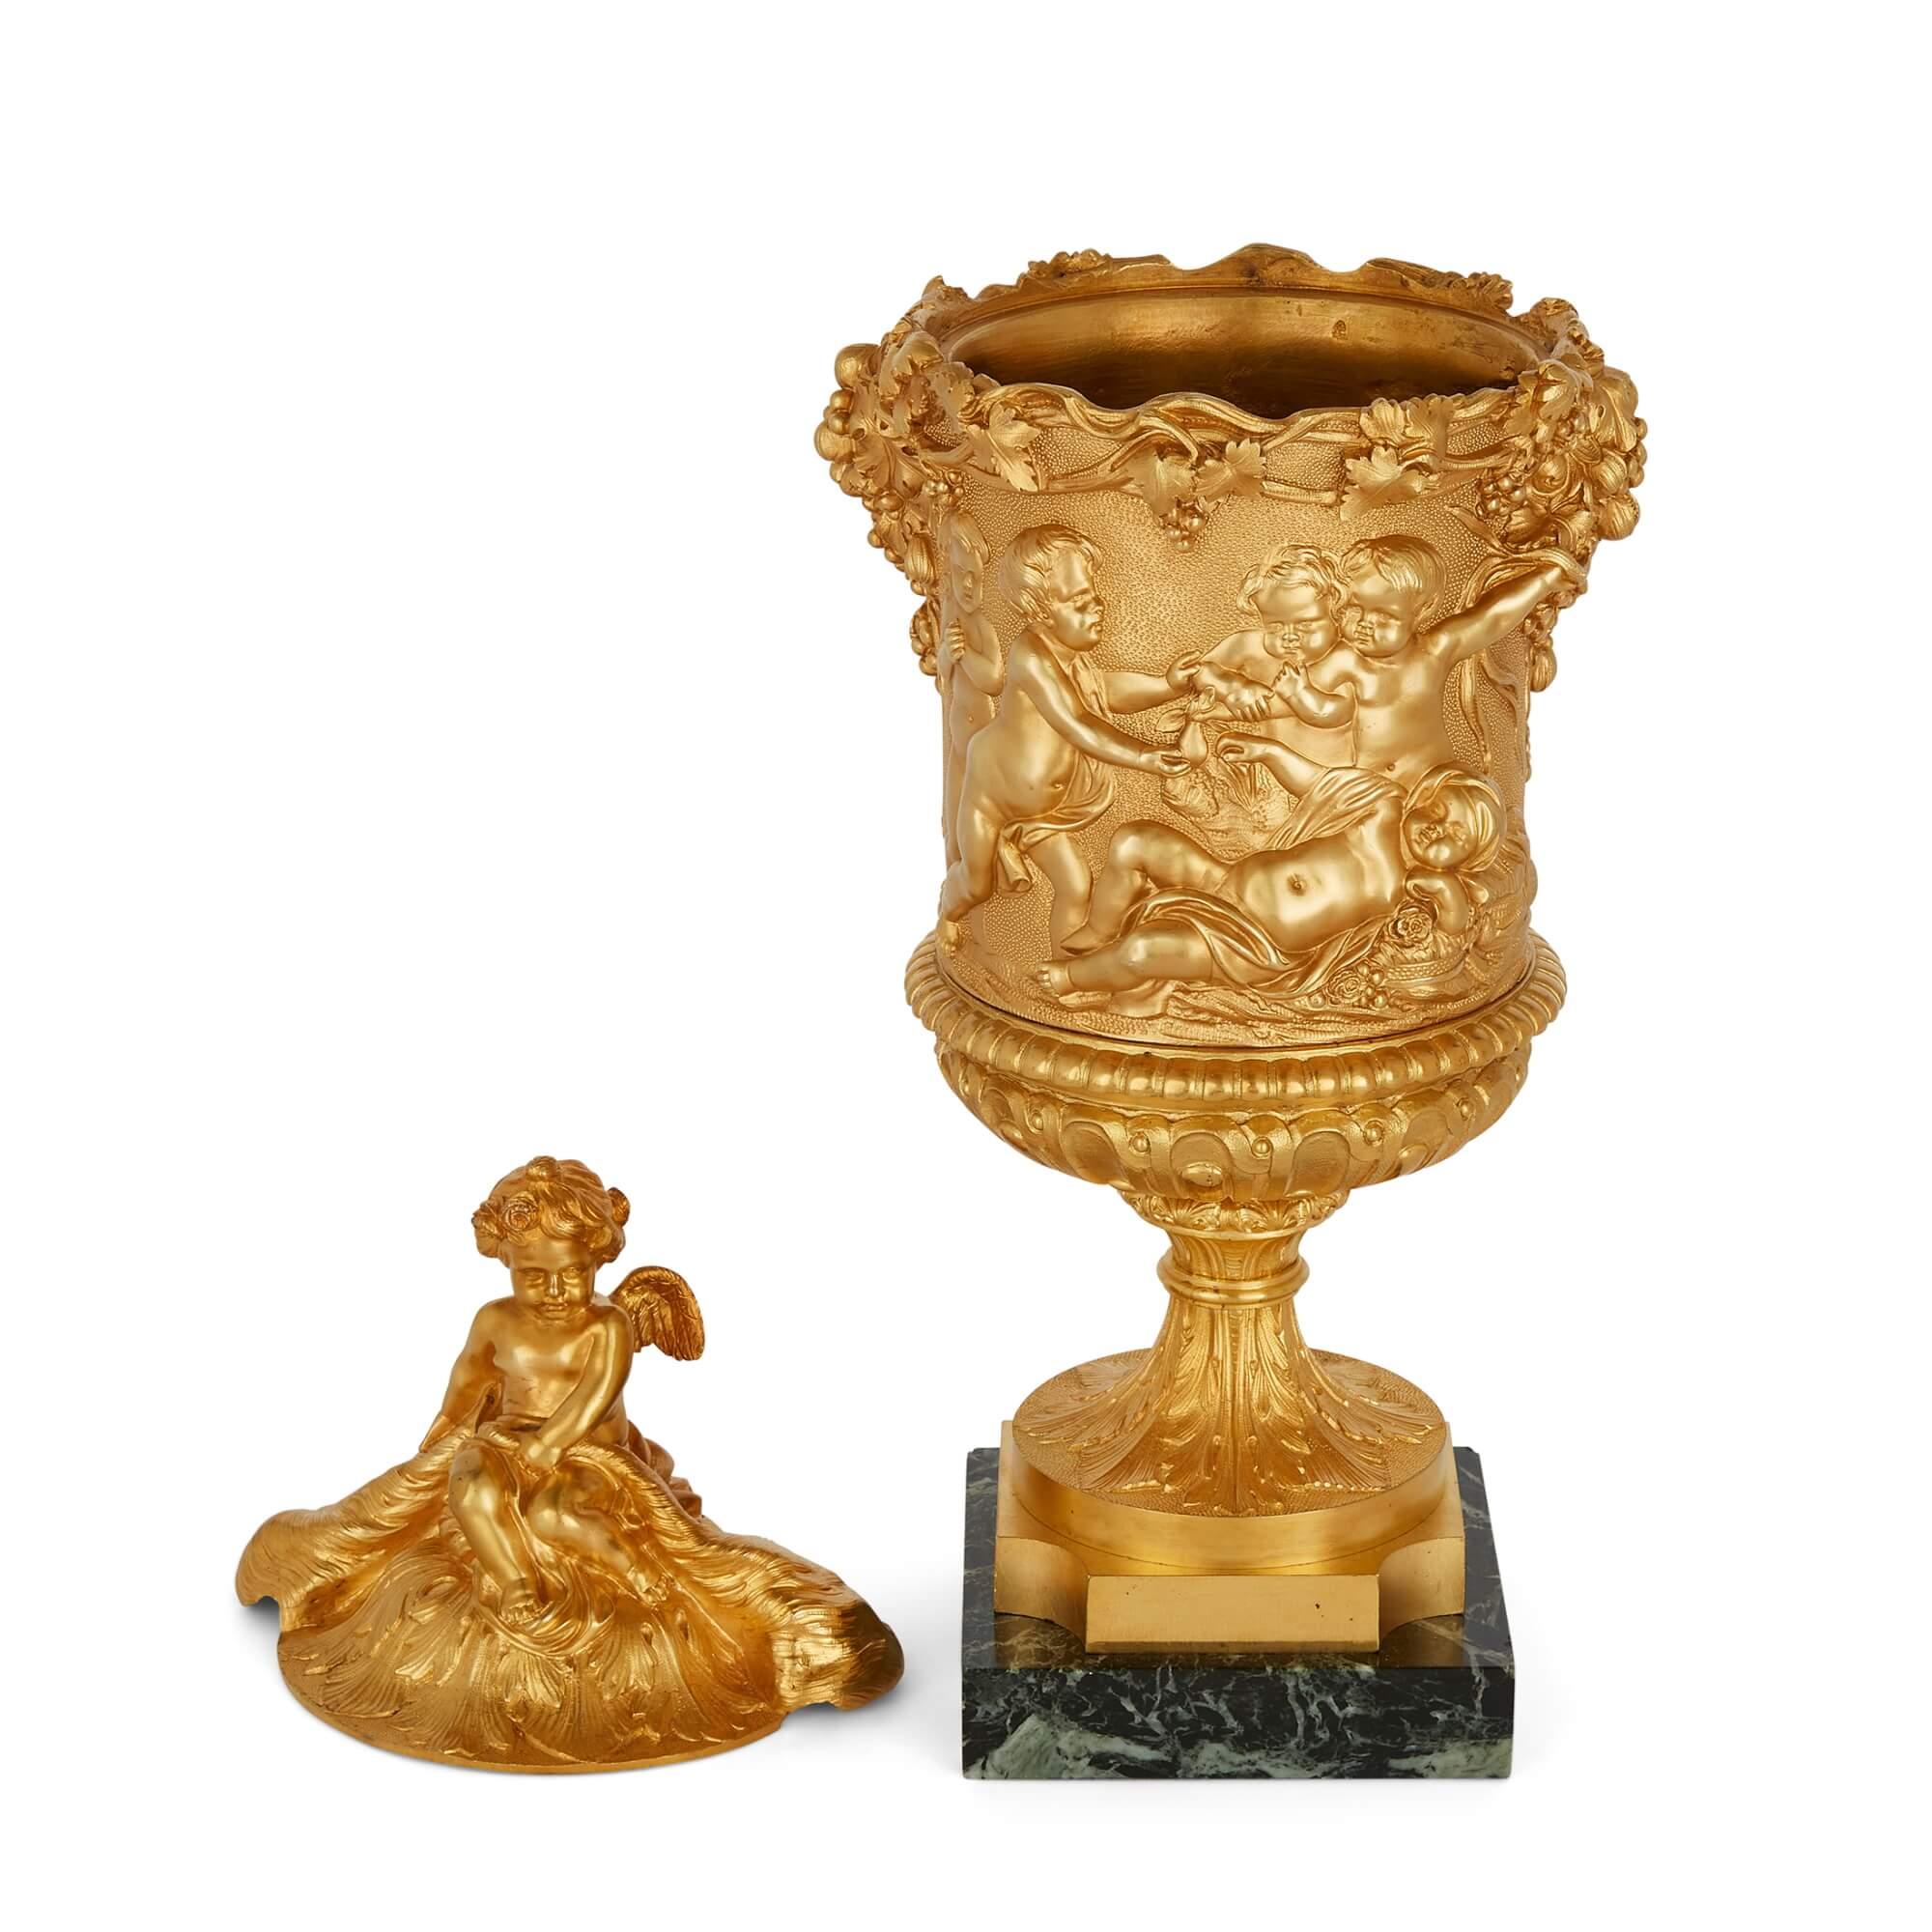 19th Century Pair of Louis XVI Style Ormolu Lidded Urns, Designs in the Style of Clodion